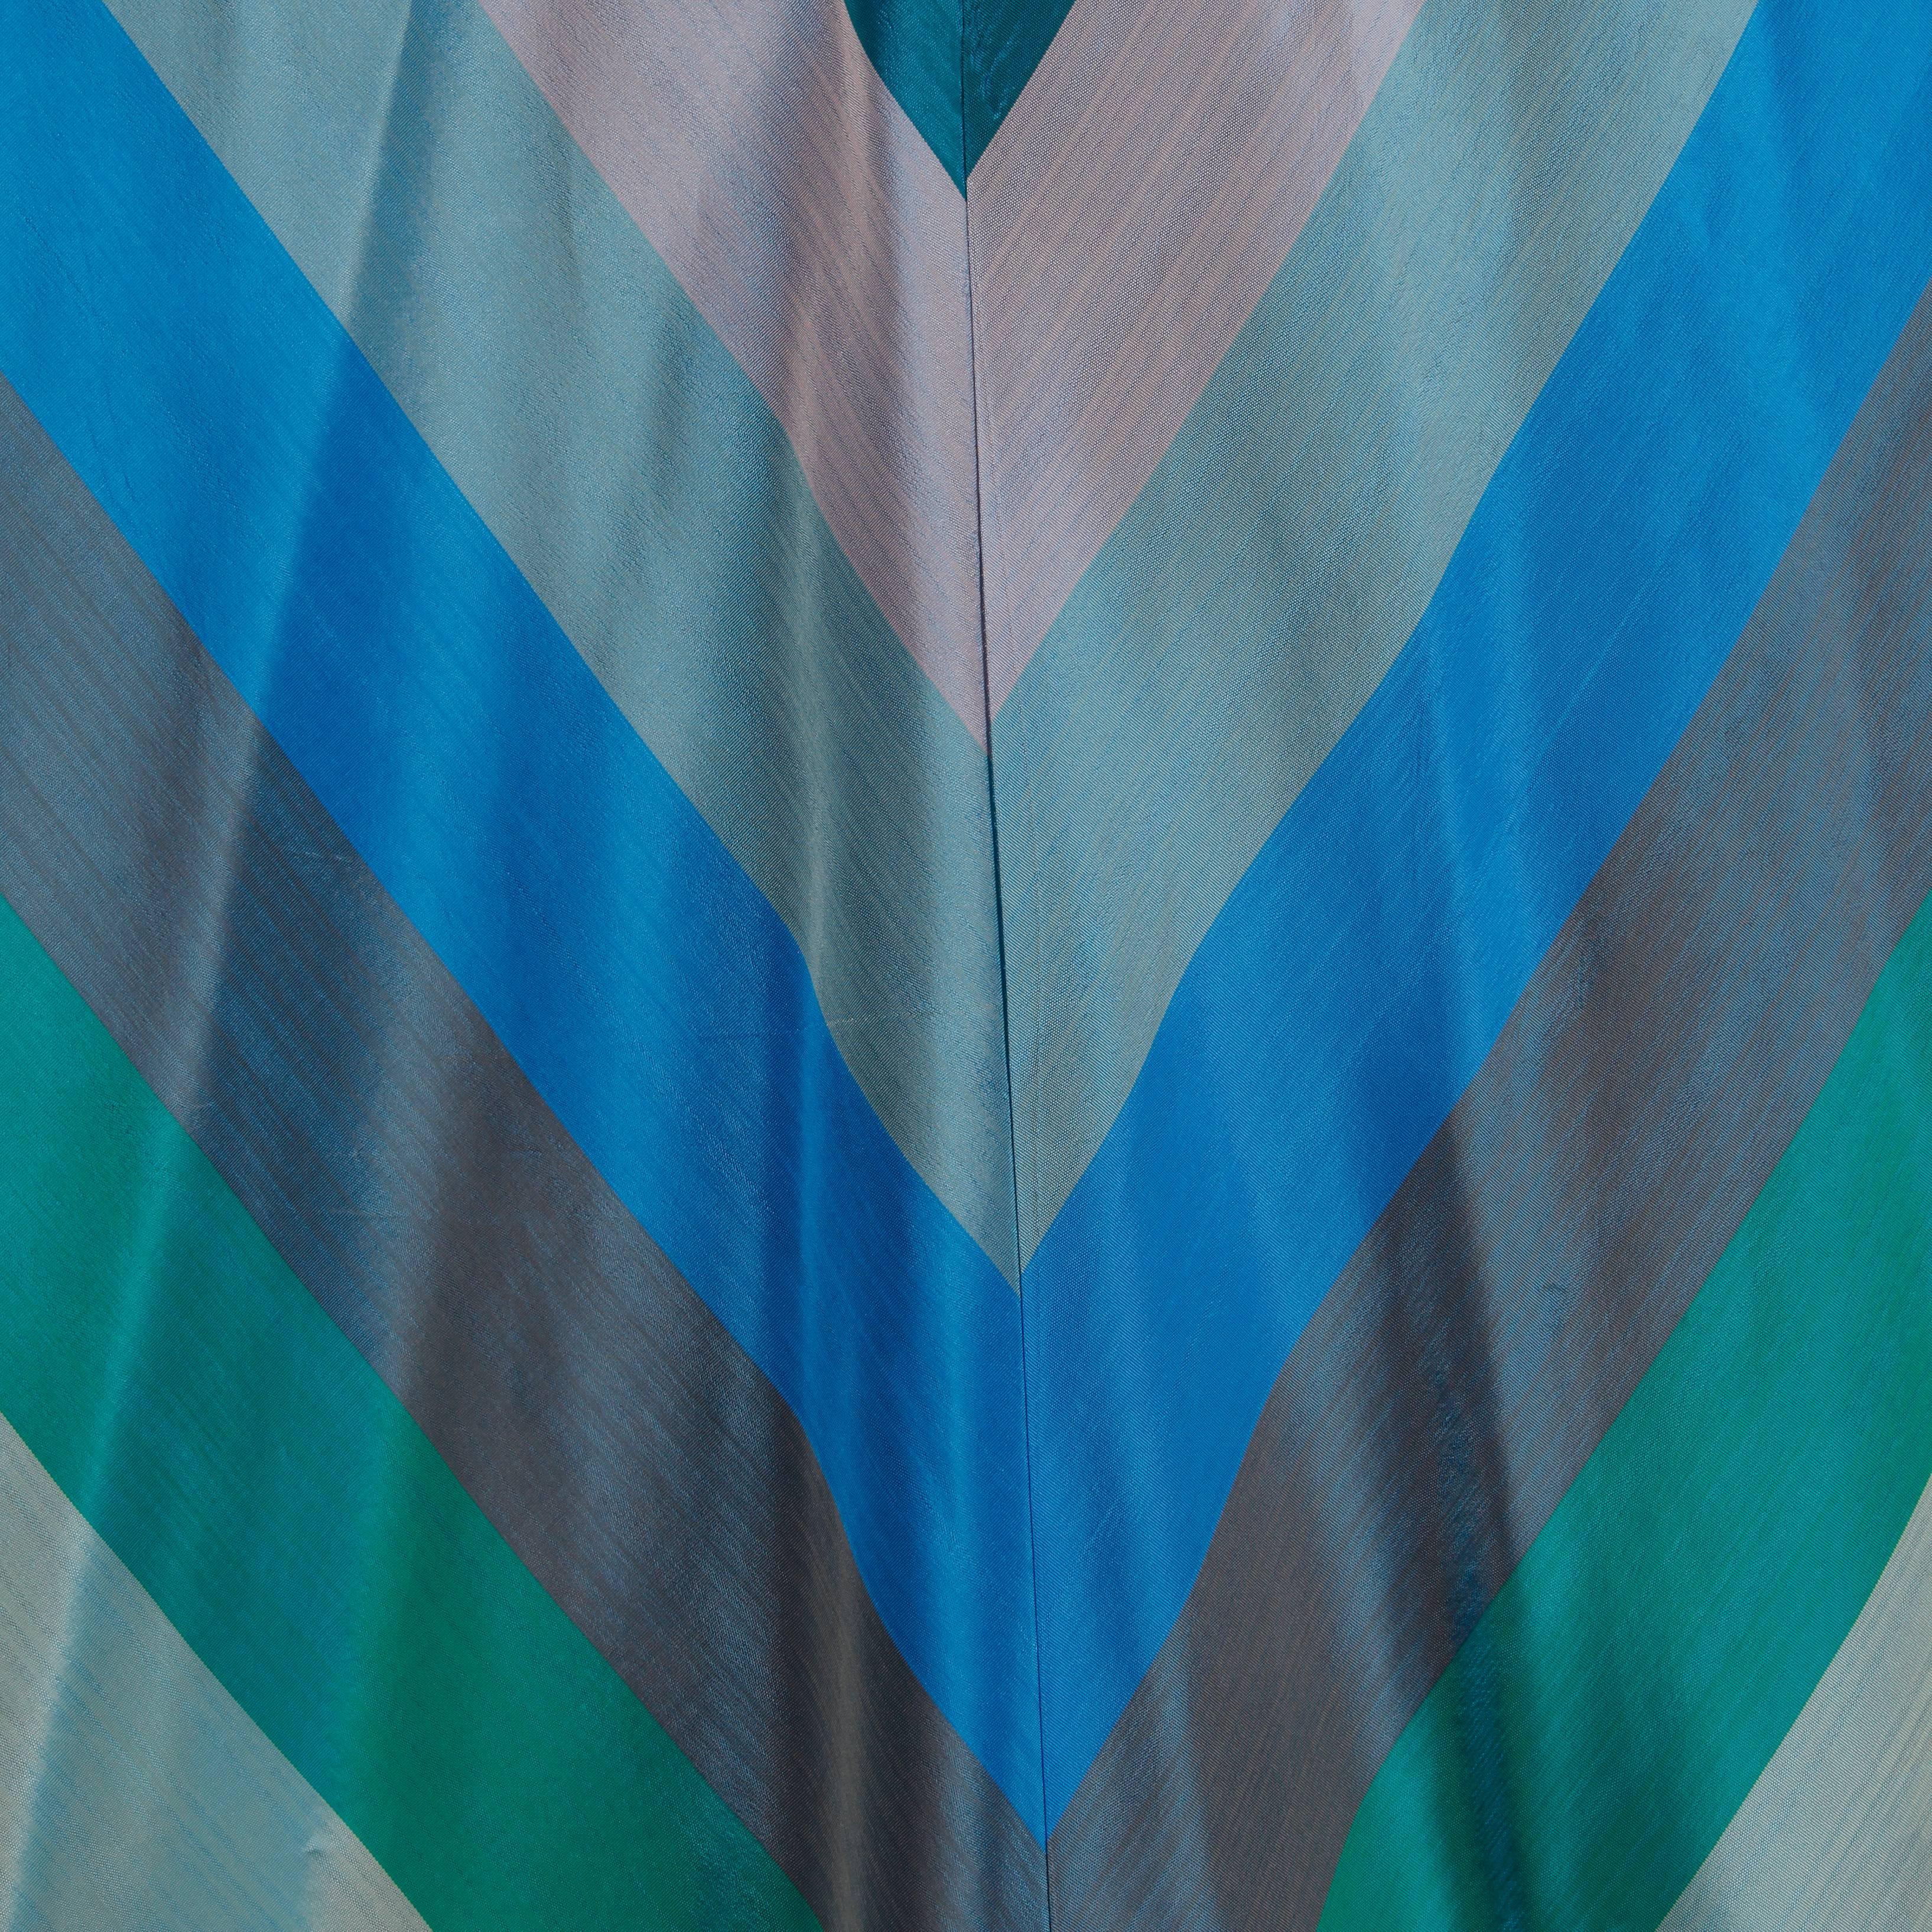 Incredible colors! This vintage light weight duster or robe from the 1940s features the most amazing striped chevron design. Unlined with front button closure. Hidden side pockets. The marked size is 18, but will fit most sizes S-L on account of its